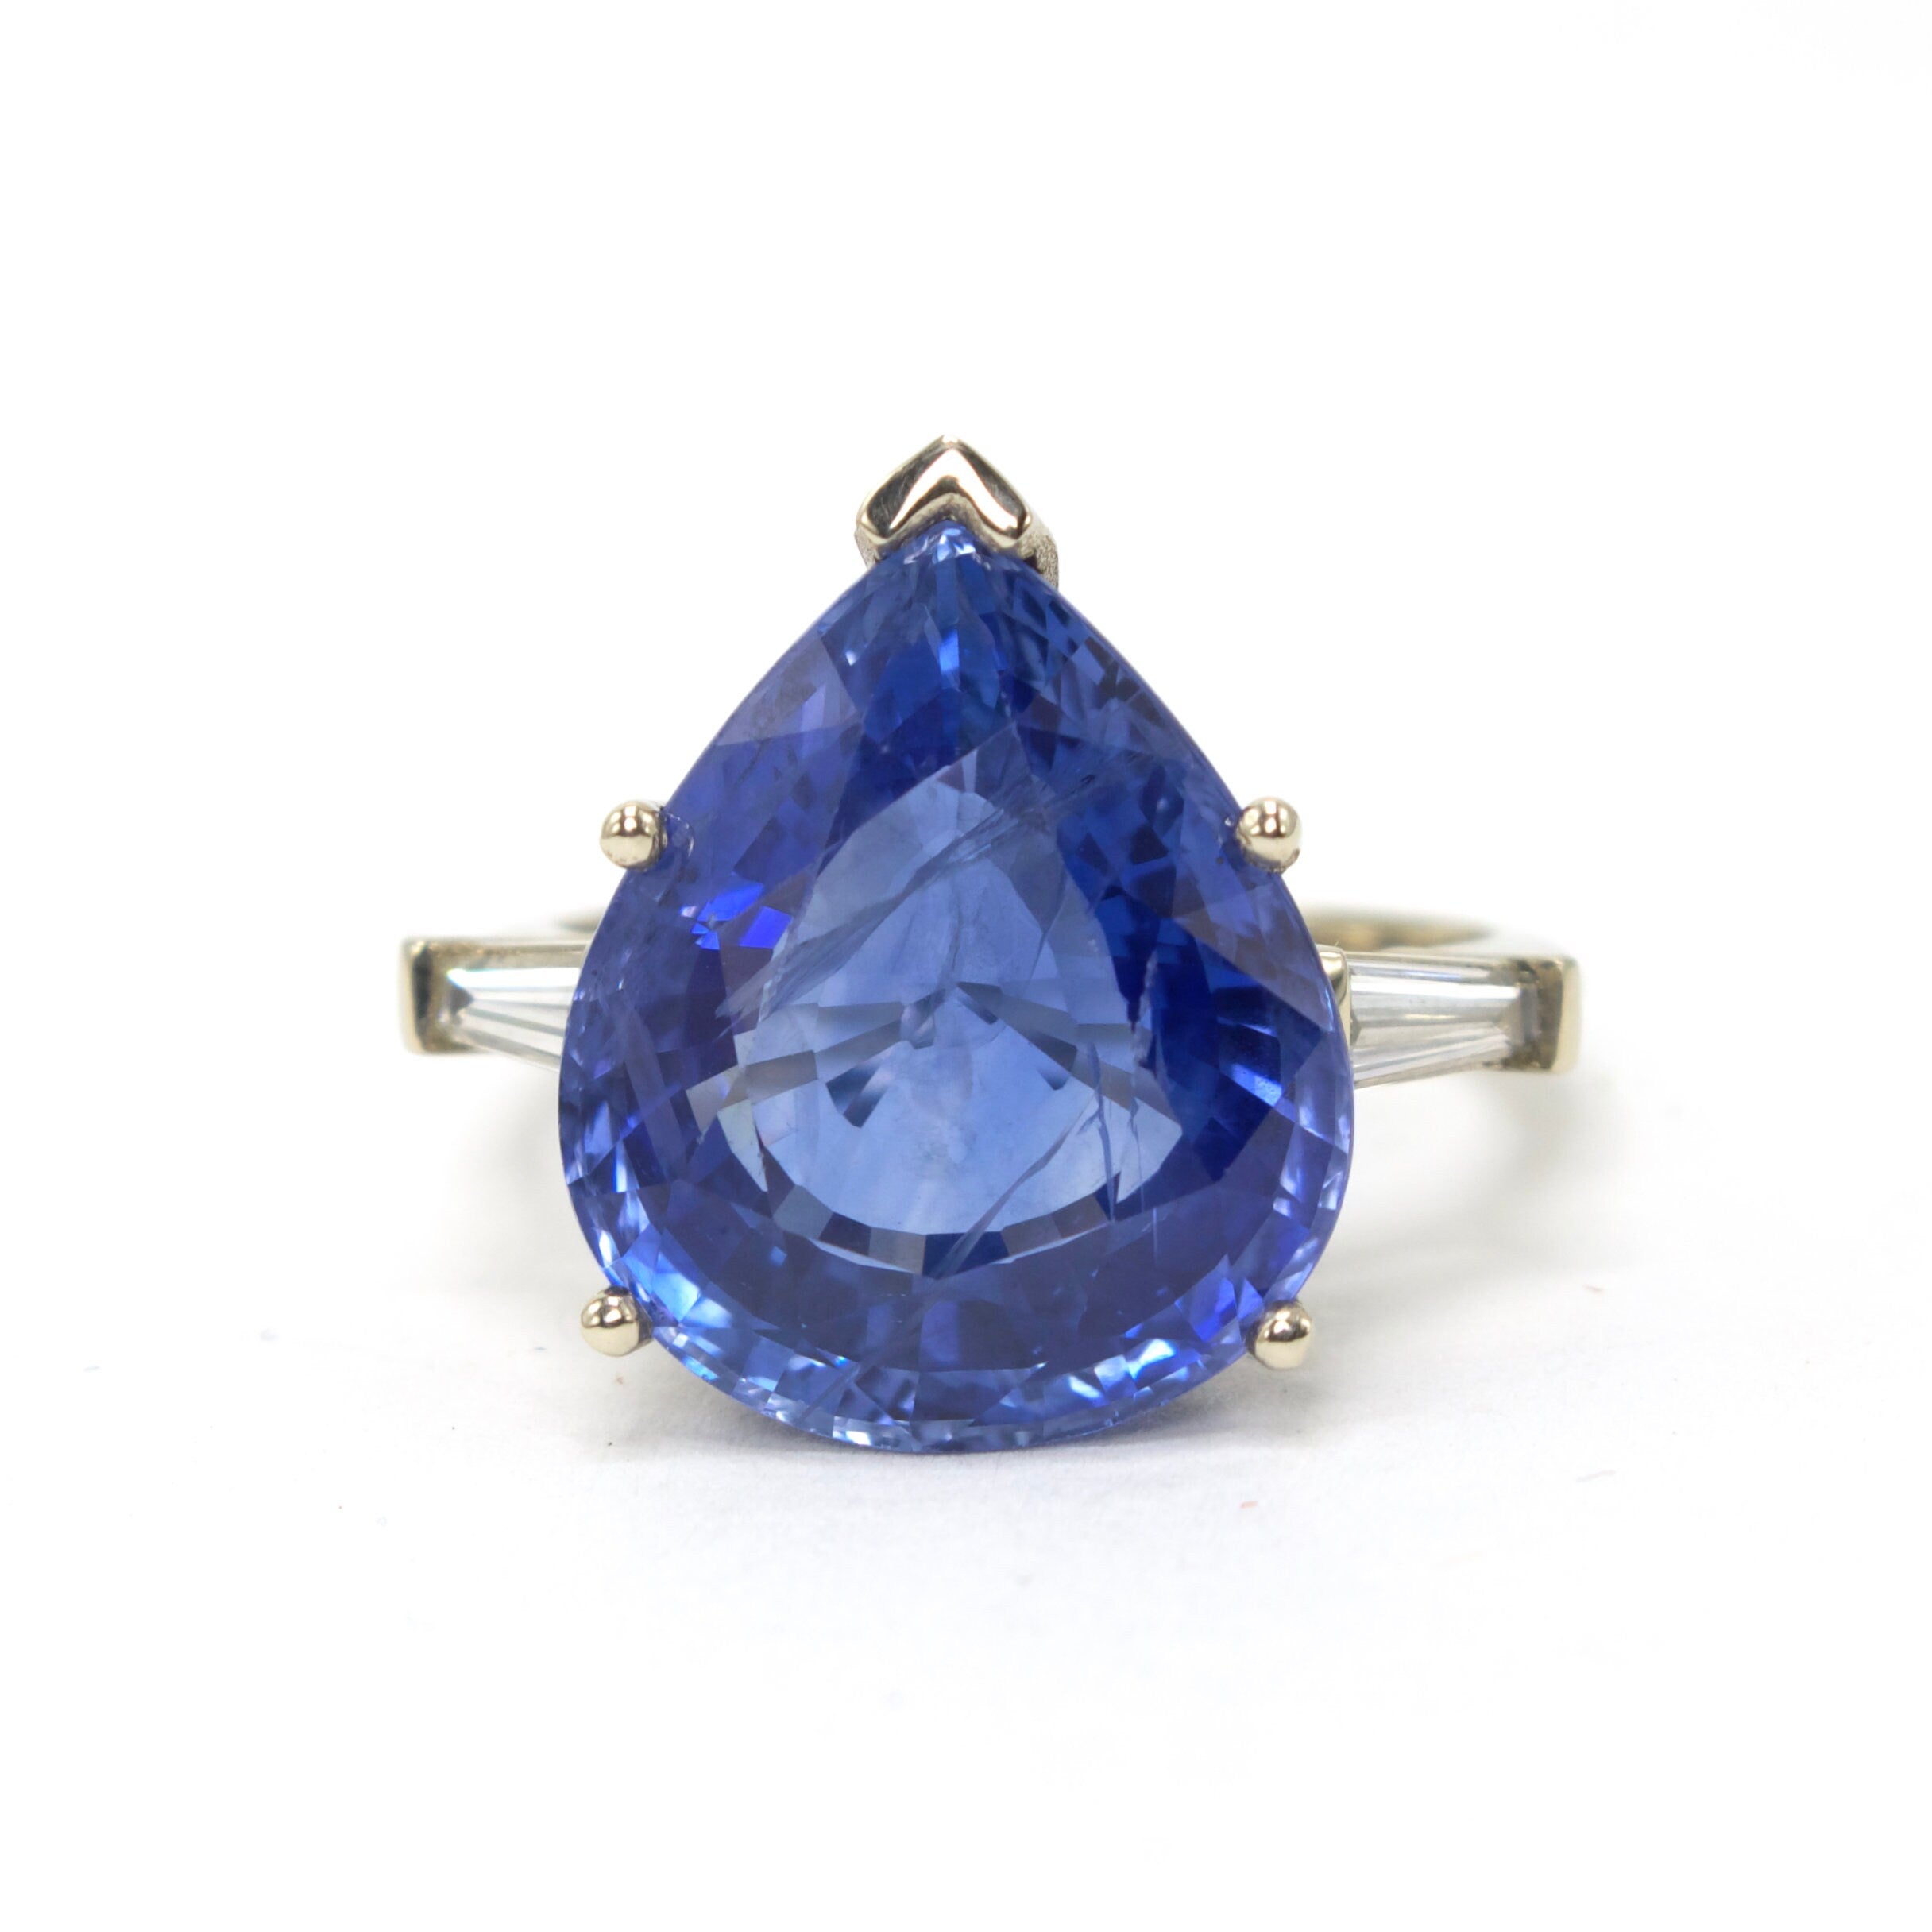 GIA Certified 12.7ct Sri Lankan Pear Blue Sapphire in White Gold with Baguettes